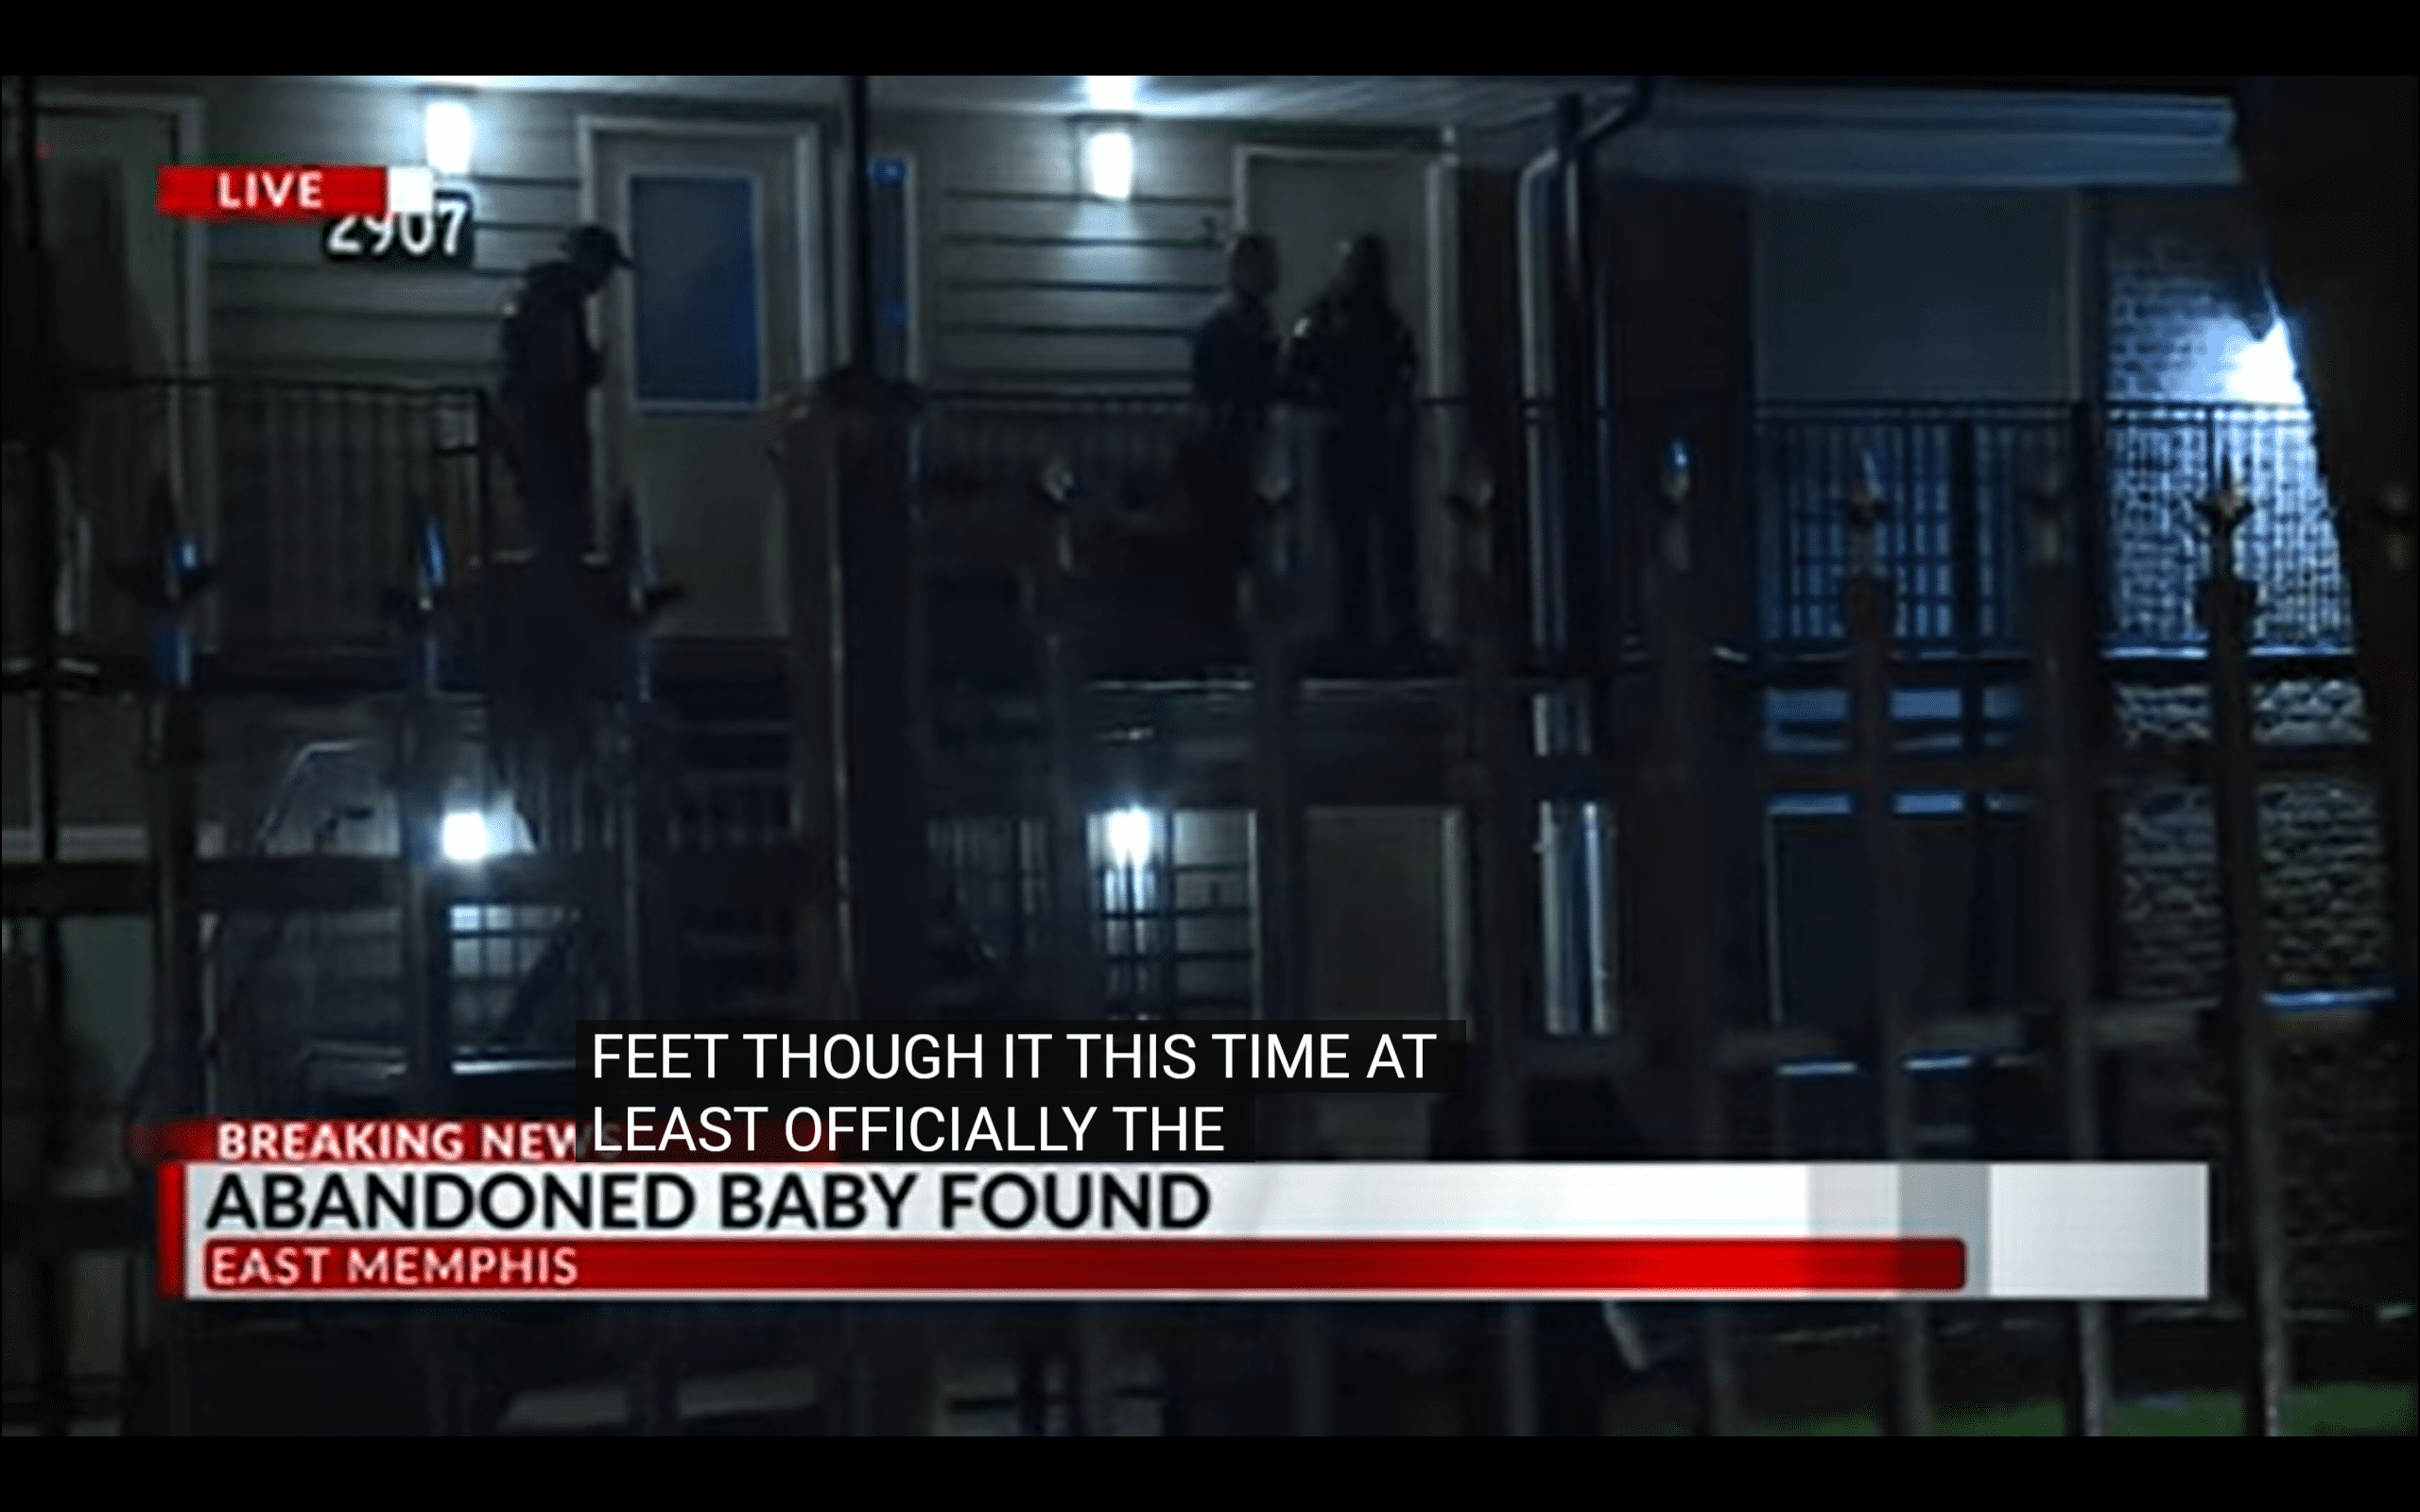 Family found an abandoned baby alone in an apartment complex. | Photo: youtube.com/WREGNewsChannel3  twitter.com/KSolomonReports